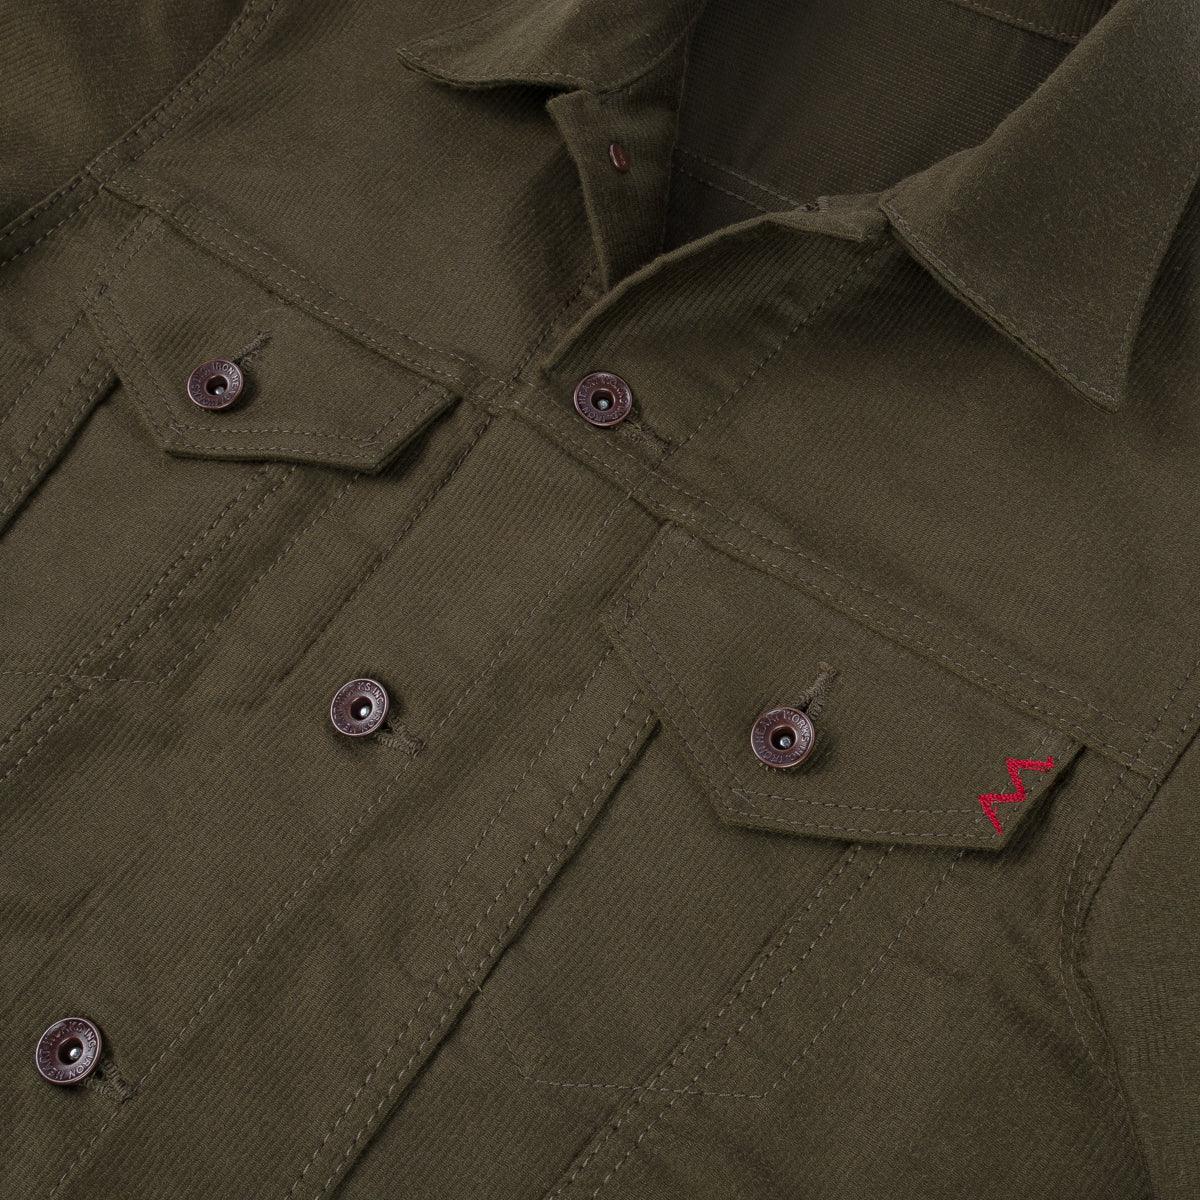 Image showing the IHJ-126-ODG - 12oz Whipcord Type III Jacket - Olive Drab Green which is a Jackets described by the following info Iron Heart, Jackets, Released, Tops and sold on the IRON HEART GERMANY online store